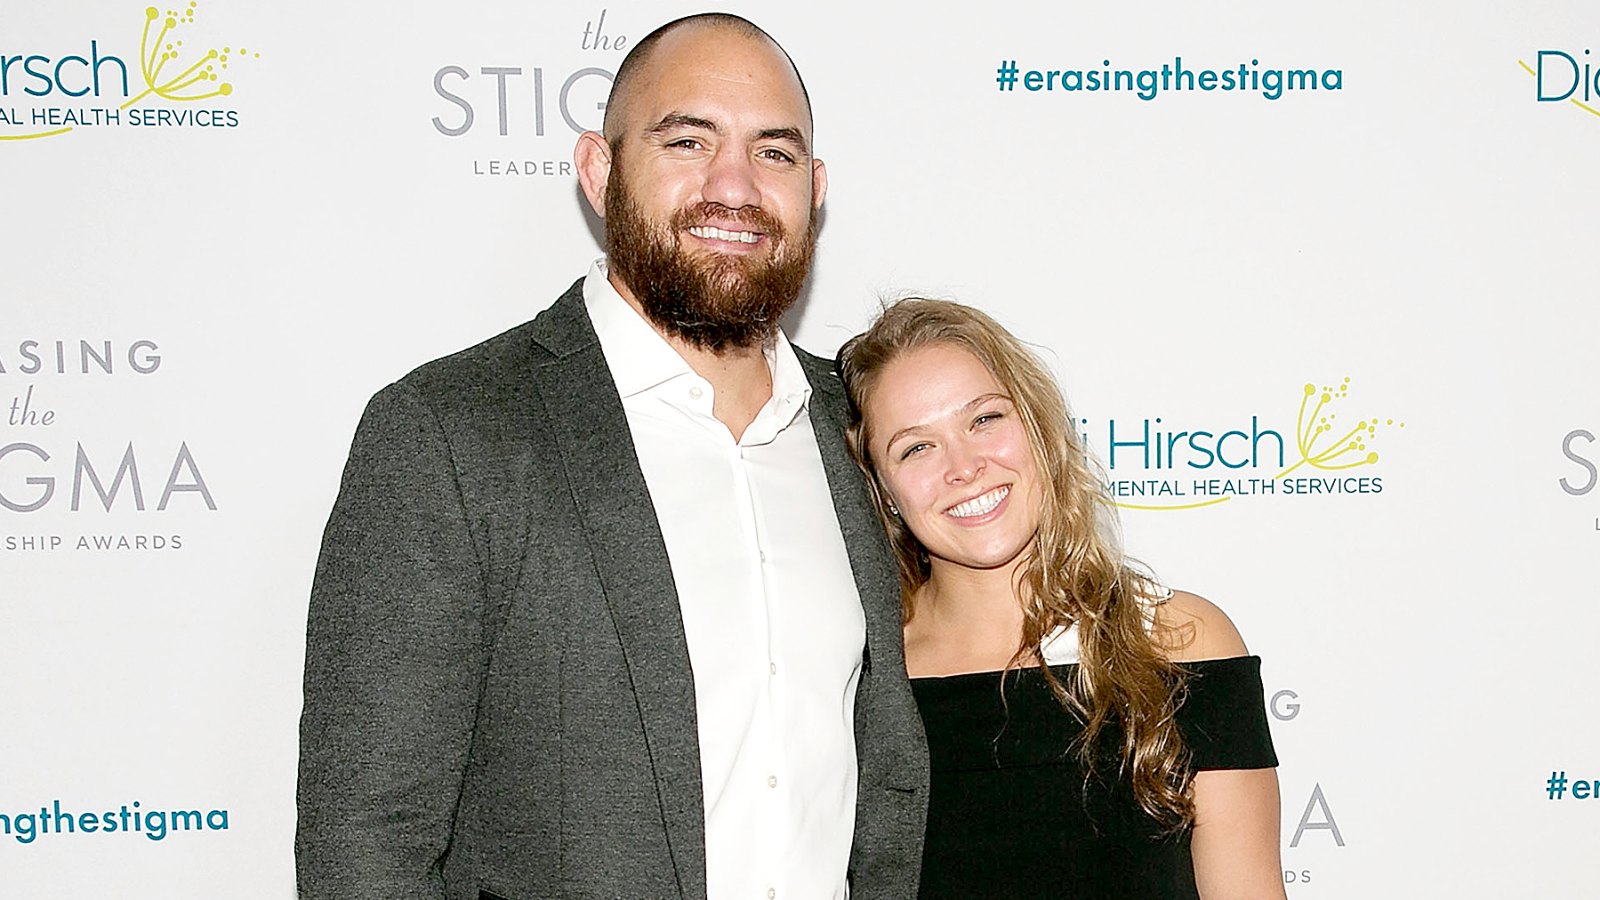 Travis Browne and Ronda Rousey arrive for the 20th Anniversary Erasing The Stigma Leadership Awards at The Beverly Hilton Hotel on April 28, 2016 in Beverly Hills, California.